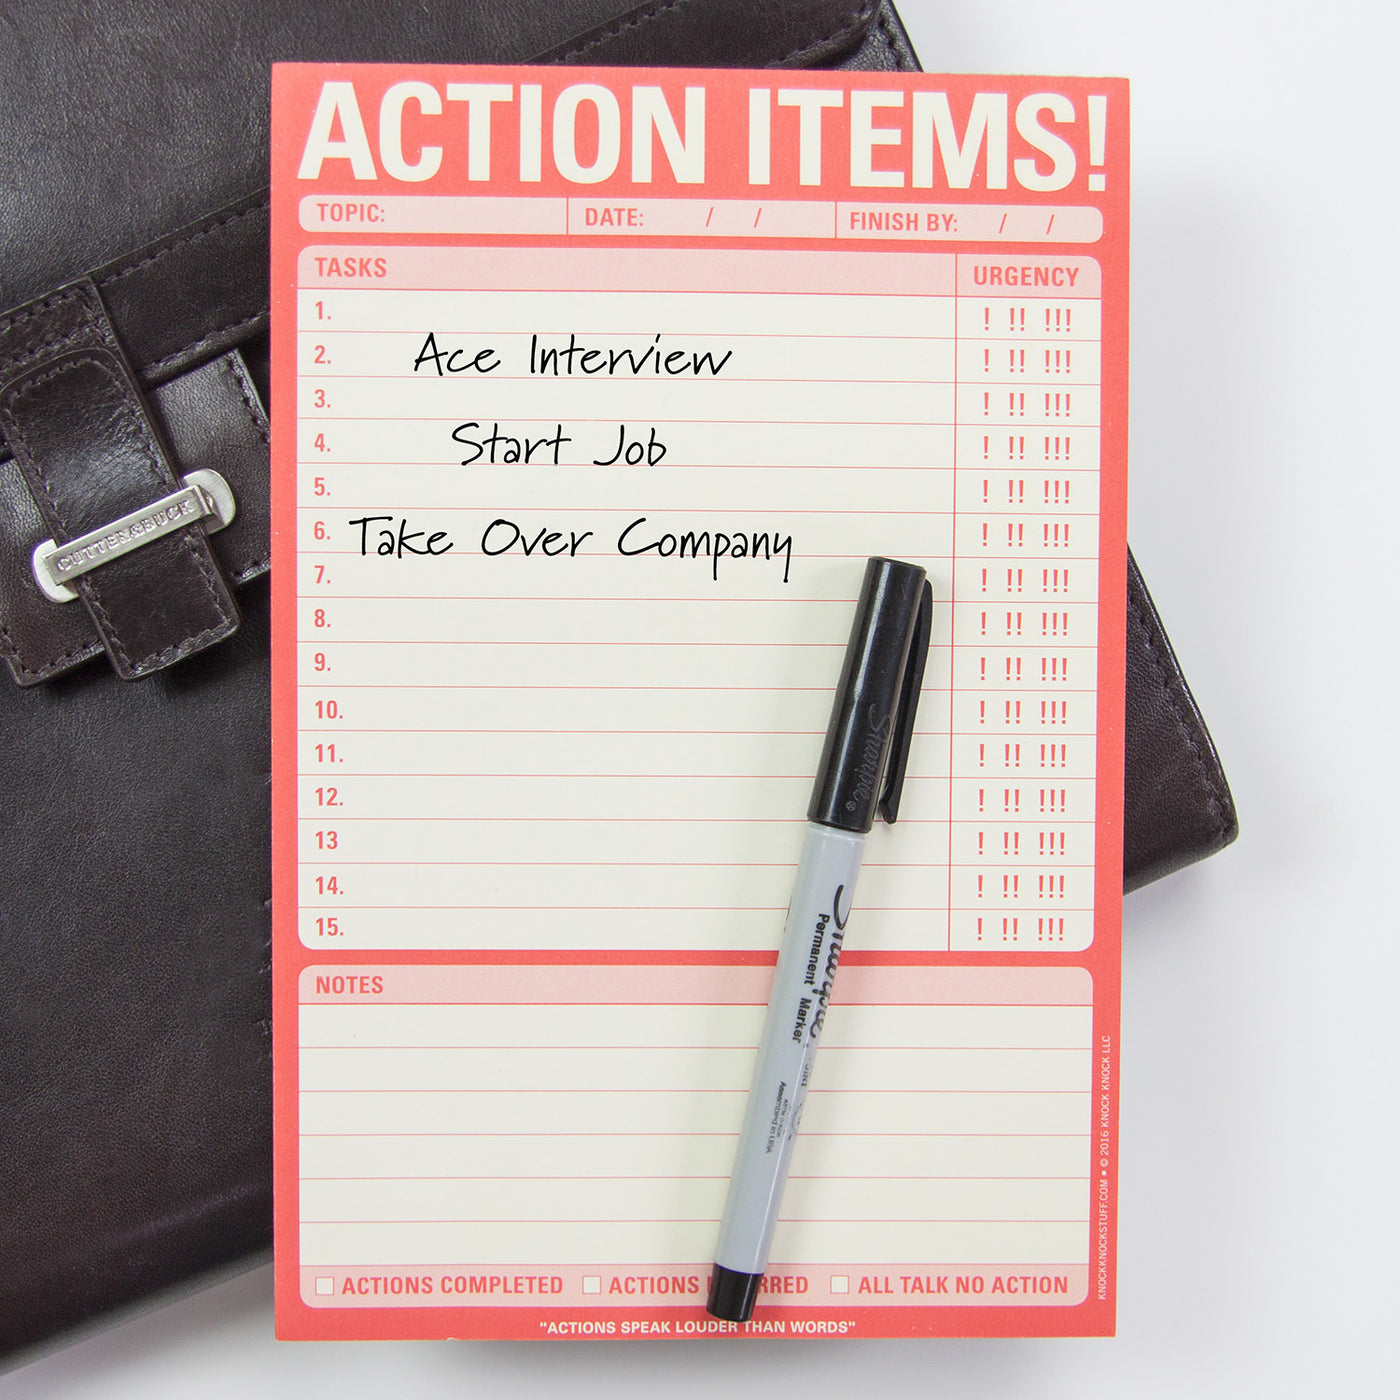 Action Items! Pad by Knock Knock